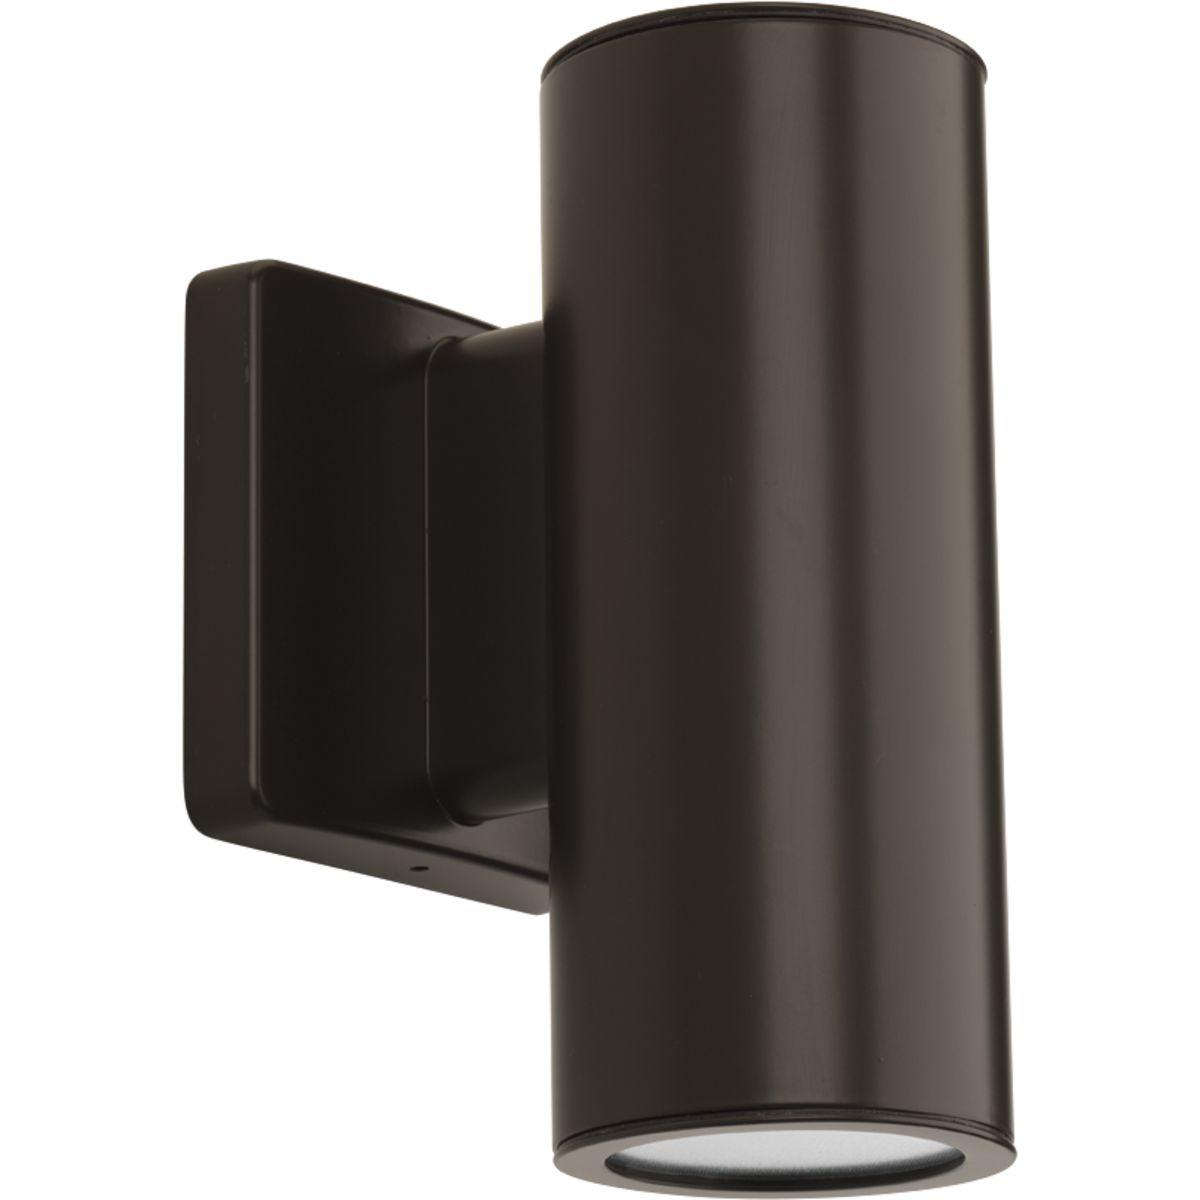 Hubbell P563001-020-30K Sleek, 3" LED cylindrical wall lantern with up/downlight in elegant Antique Bronze finish. Die-cast aluminum wall brackets and heavy-duty aluminum framing. Fade and chip-resistant. UL listed for wet locations. Can be used indoor or outdoor.  ; 3" LED wall